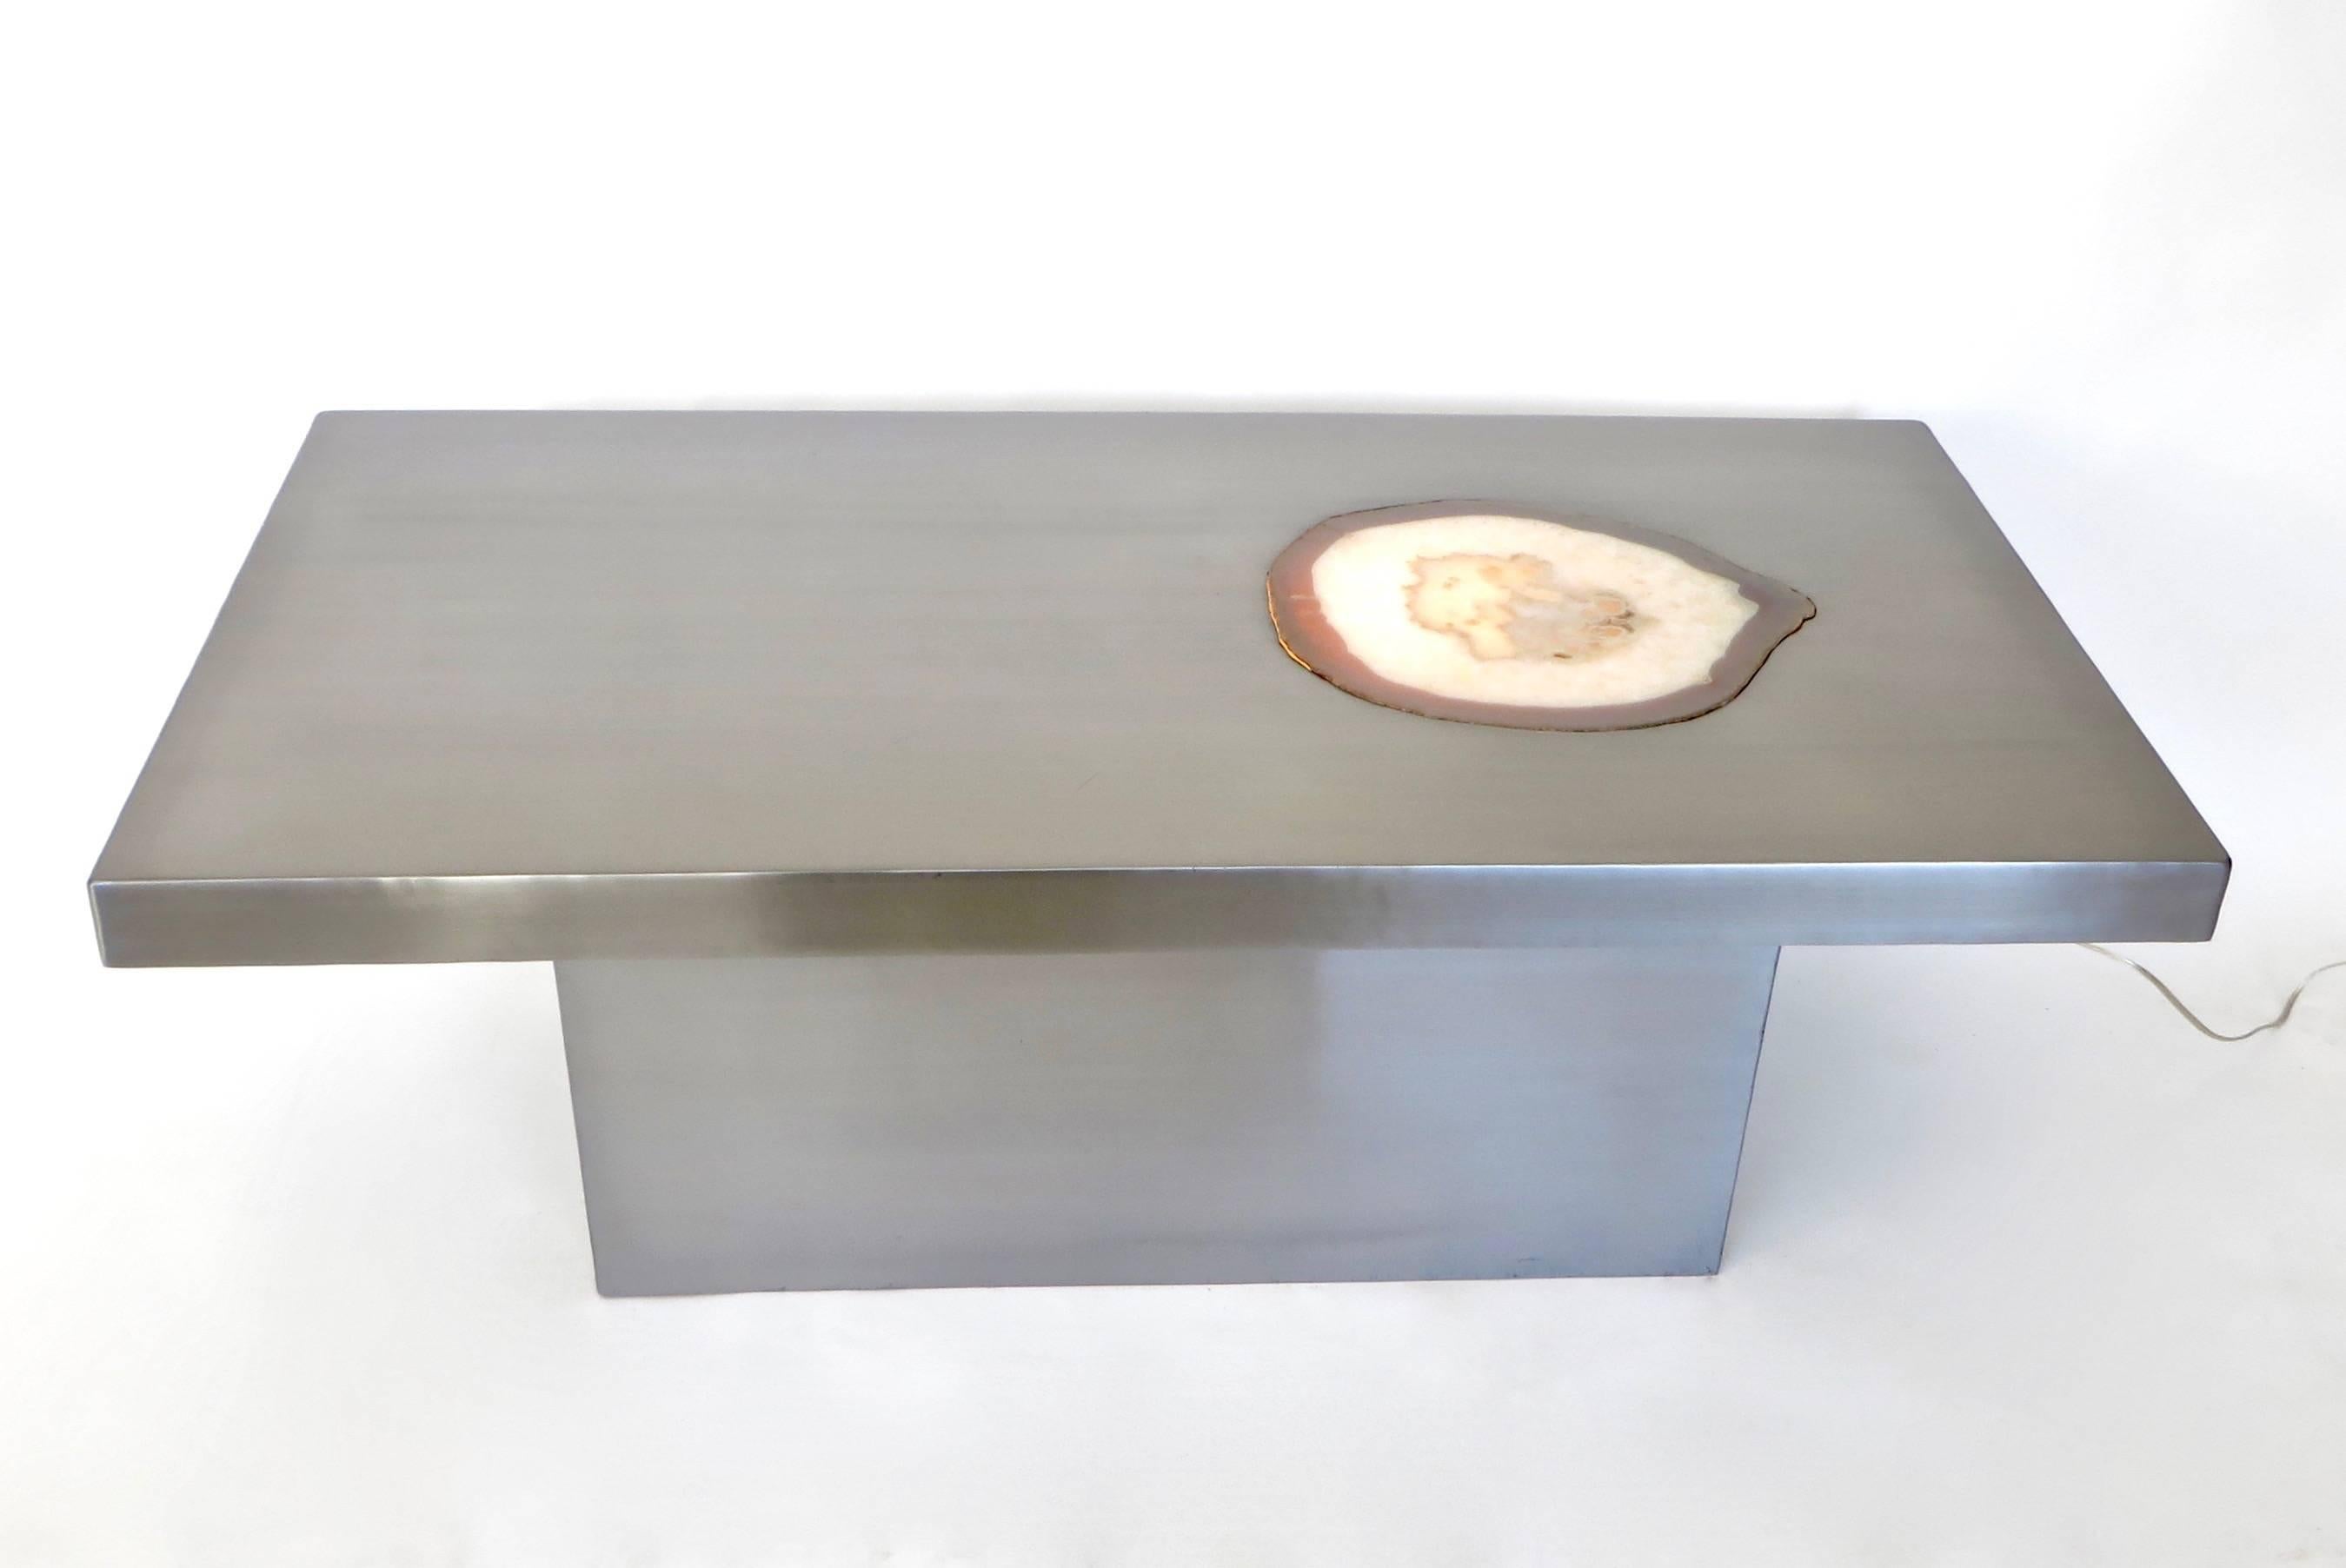 French Stainless Steel Inlaid Agate Coffee Table with Illumination from below 5